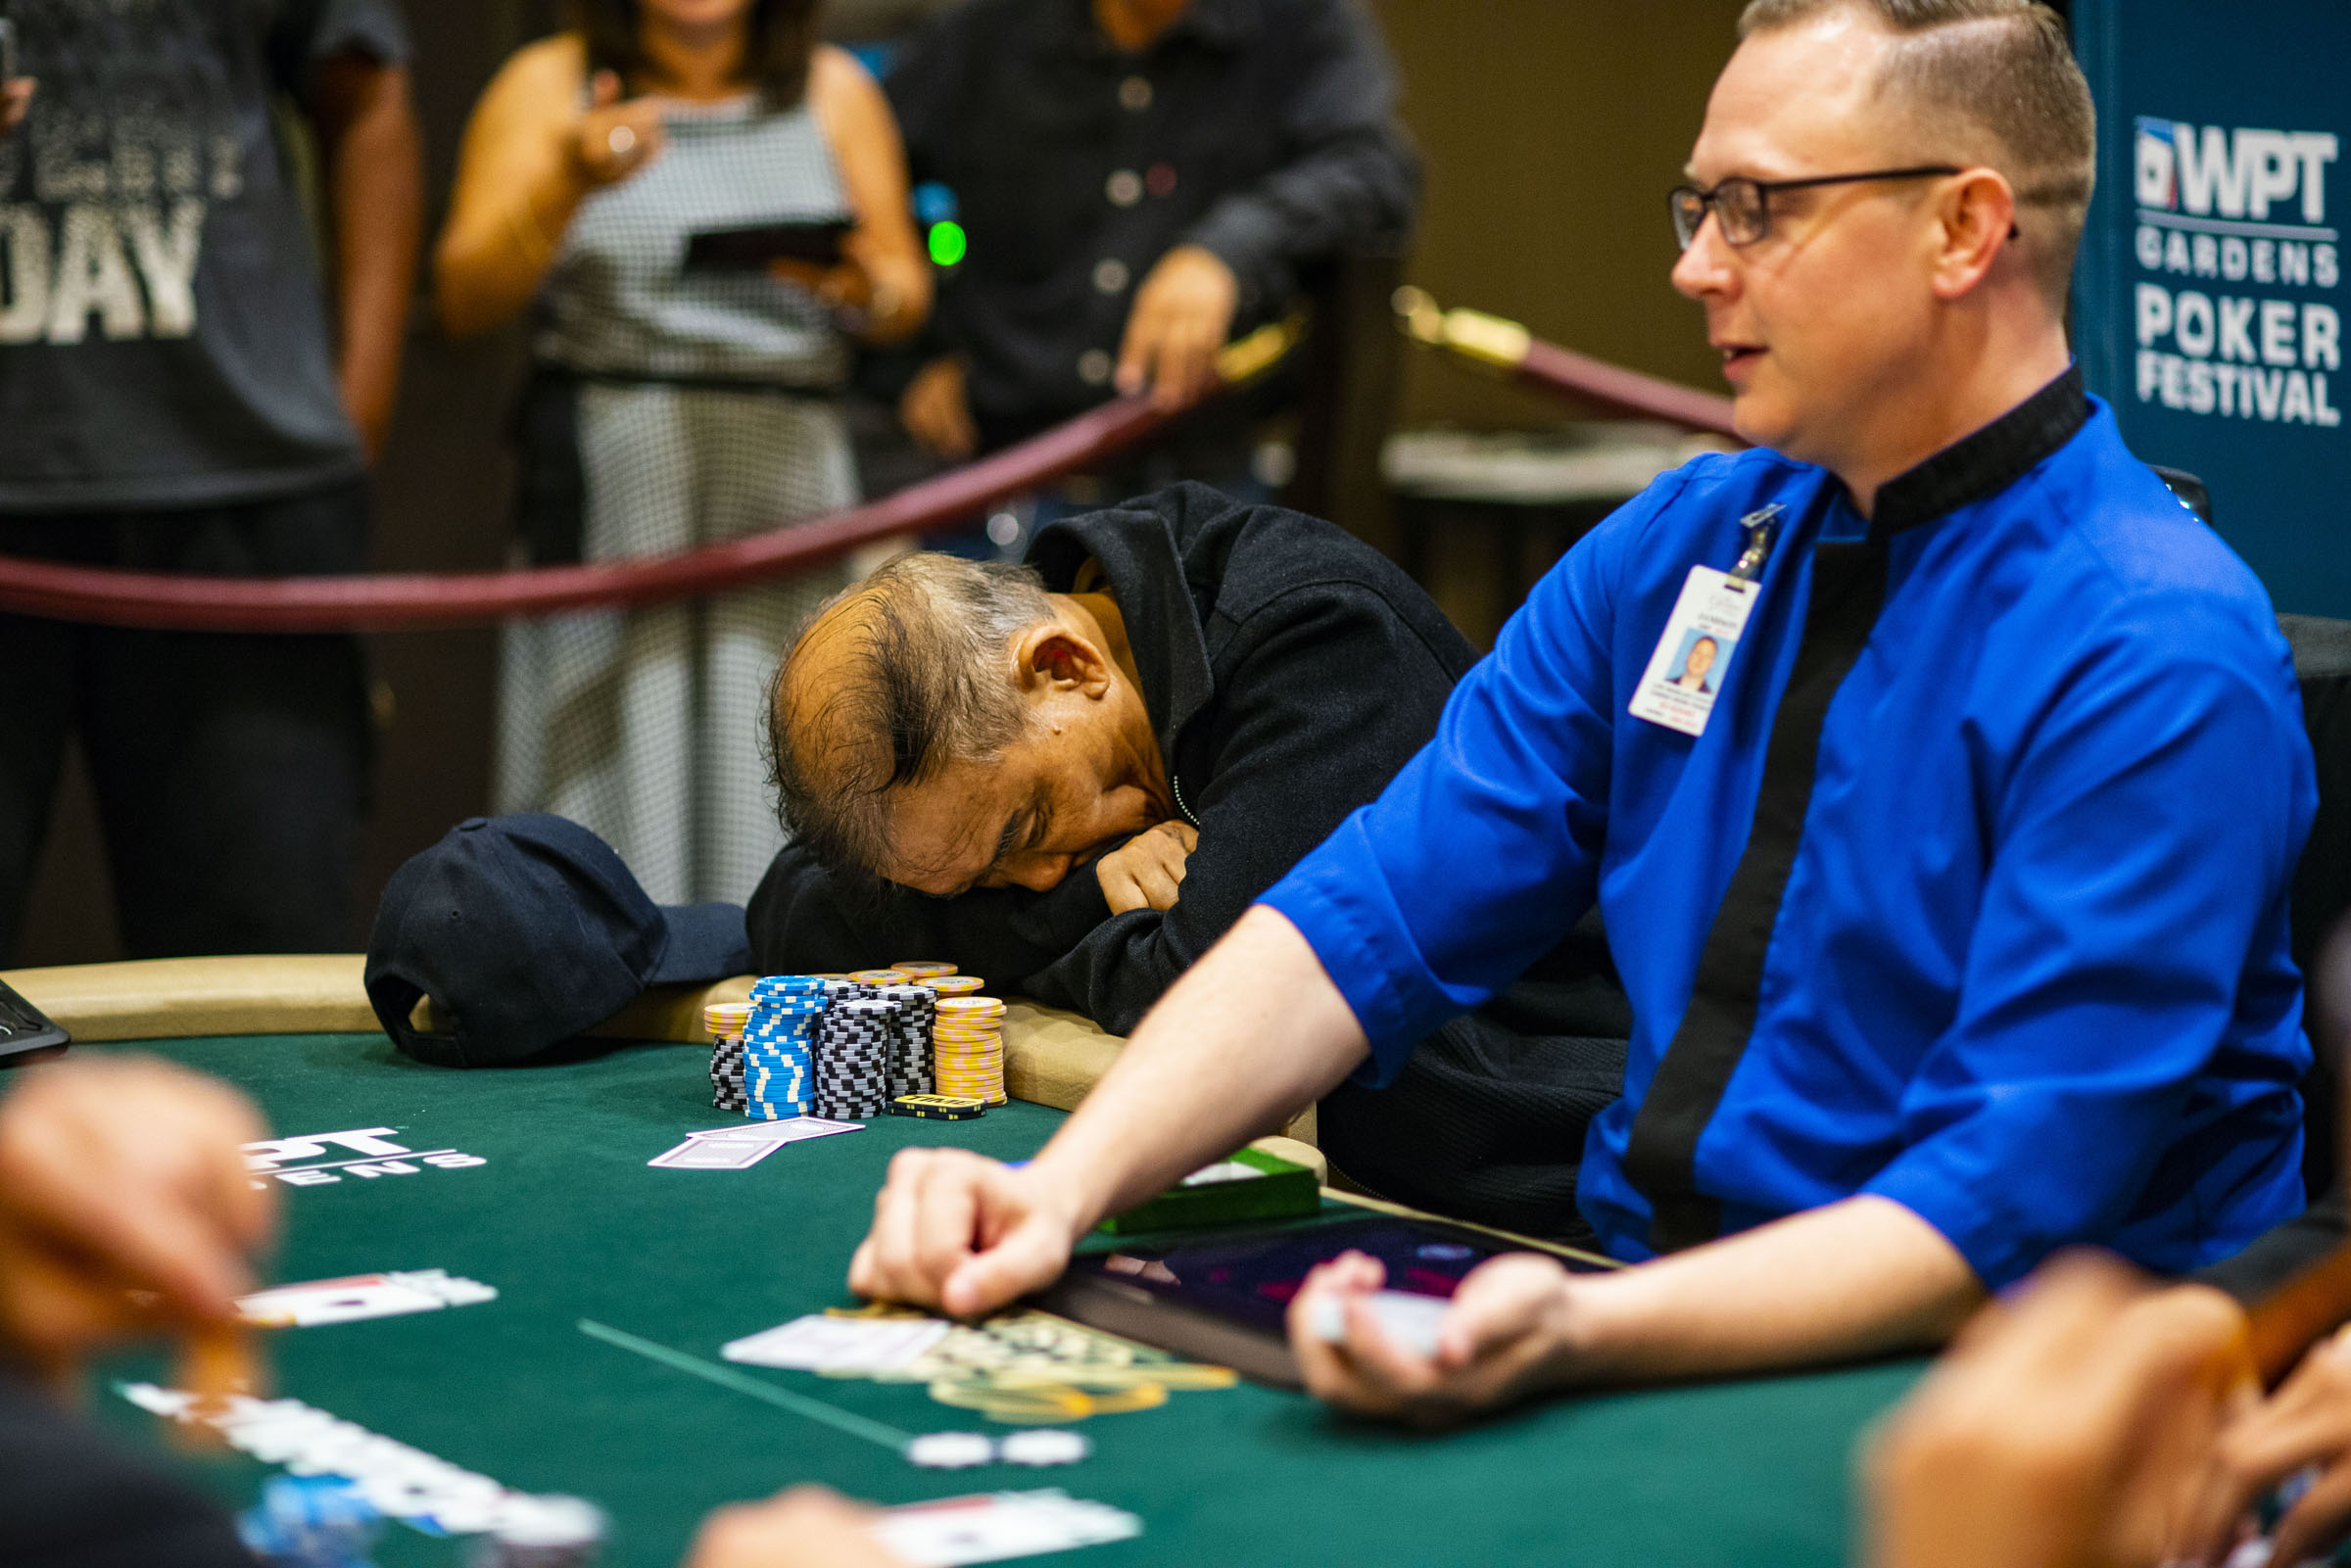 Drunken Men ‘The Master’ Nguyen Accused of Angle Shooting at WPT Gardens Event, Still Makes Final Table